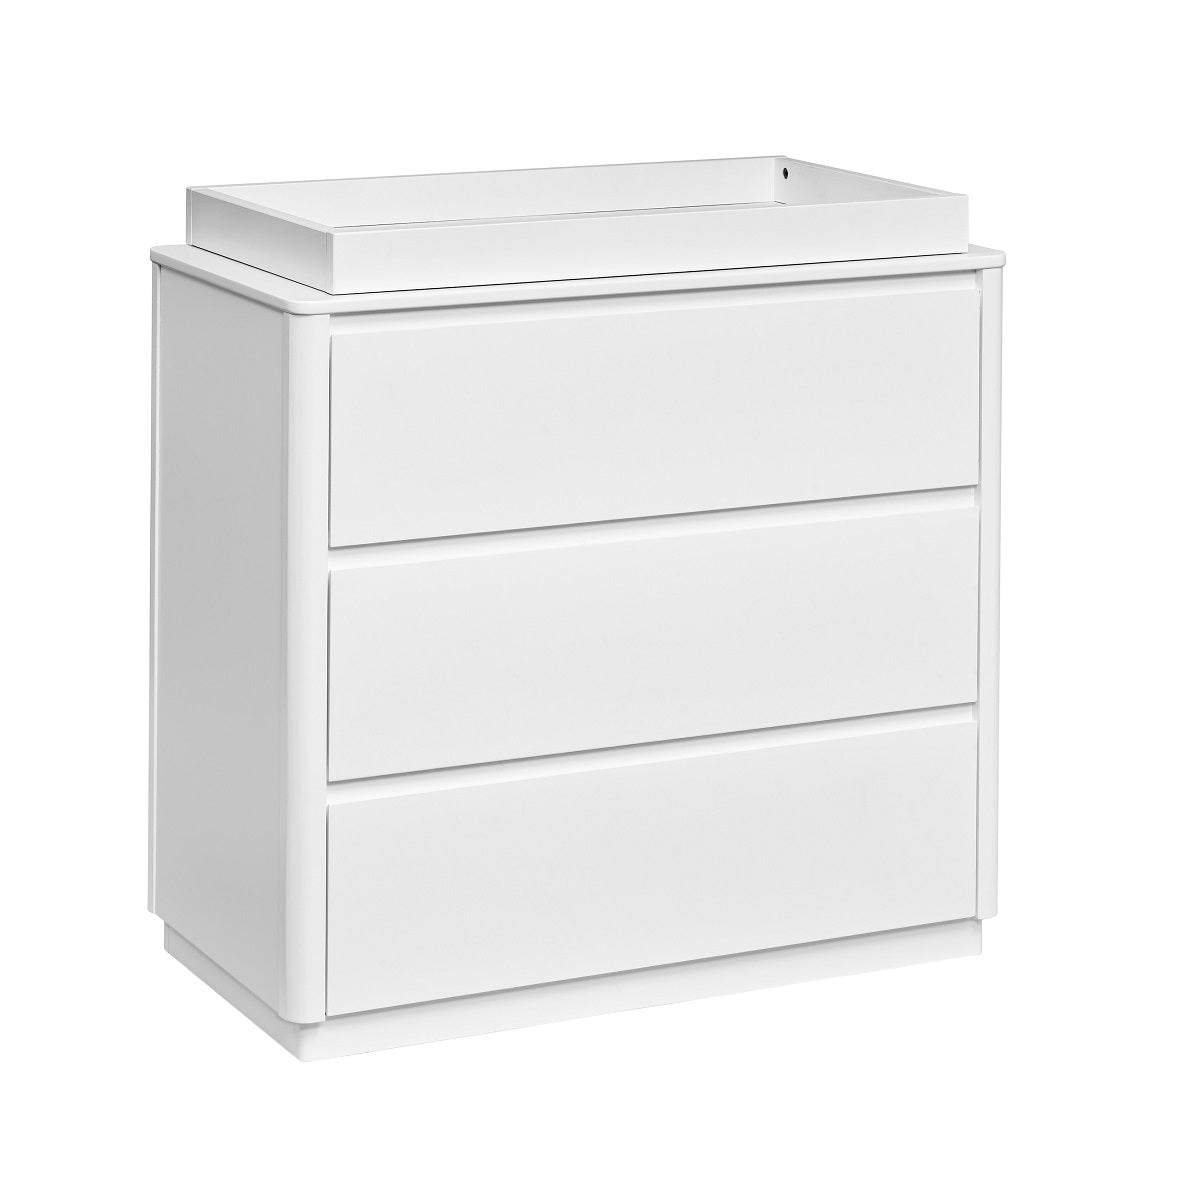 Bento 3-Drawer Changer Dresser with Removable Changing Tray